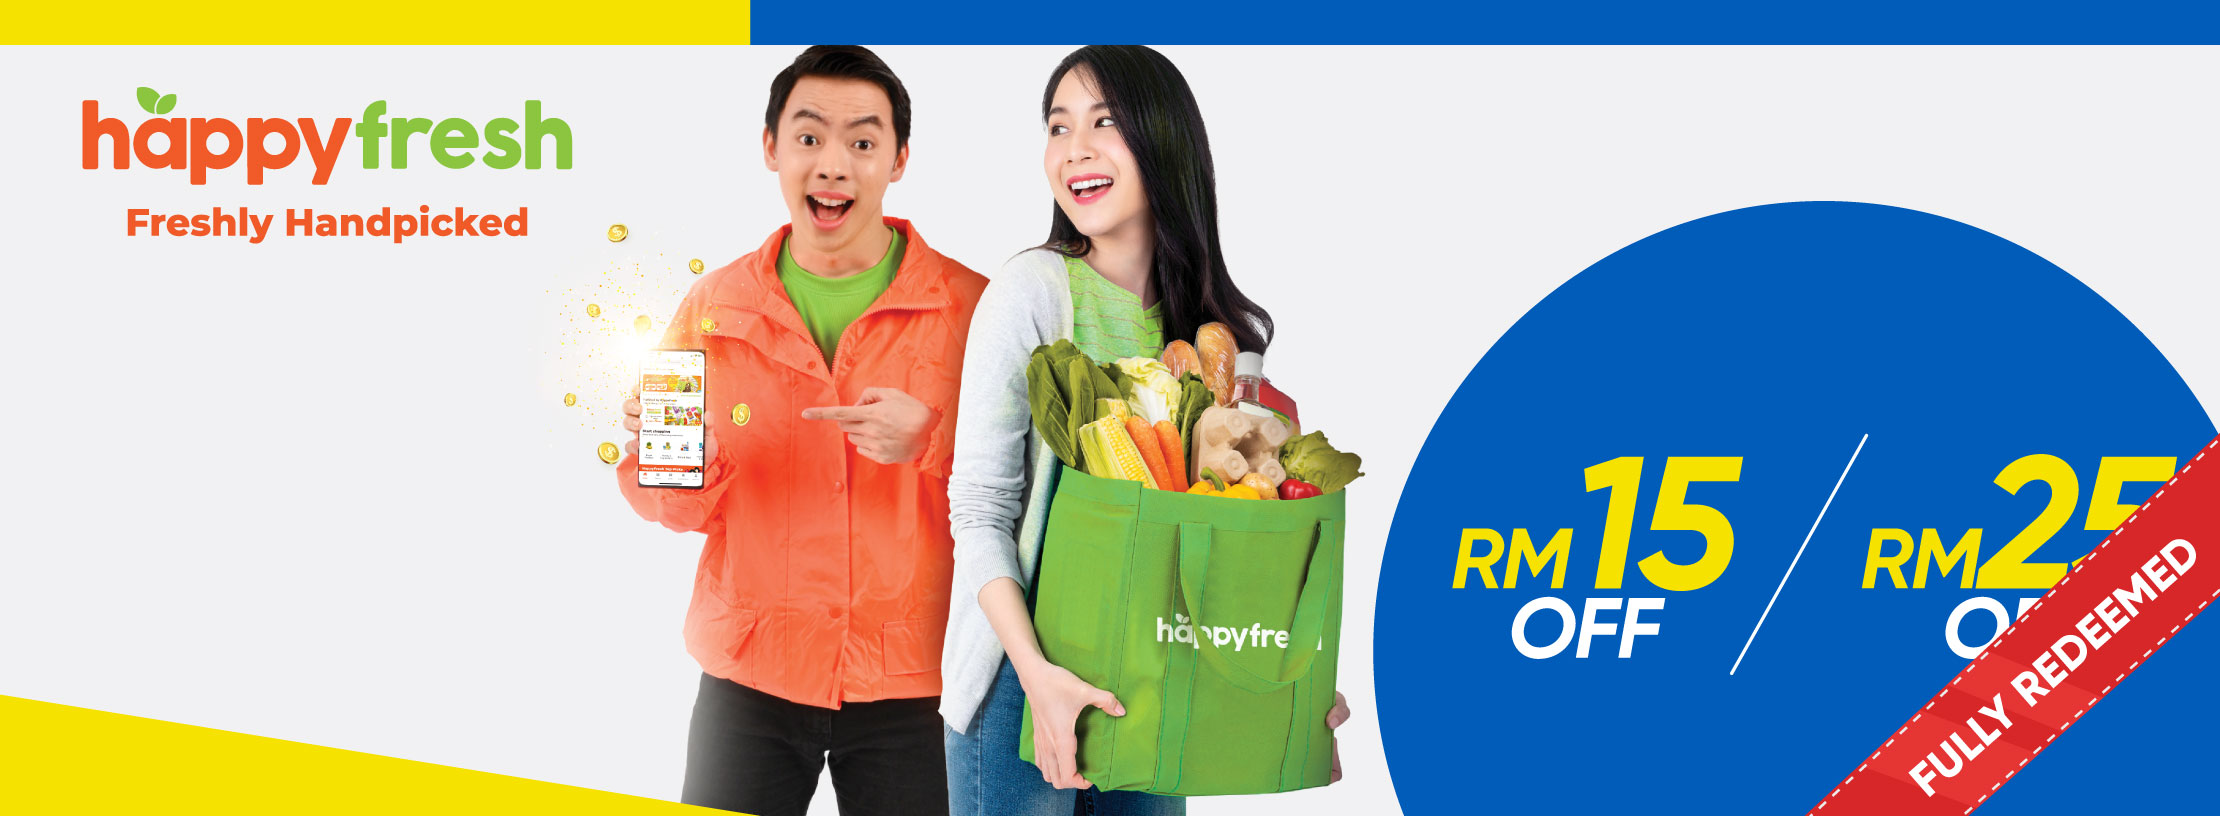 Happyfresh Up To Rm25 Off Fully Redeemed Touch N Go